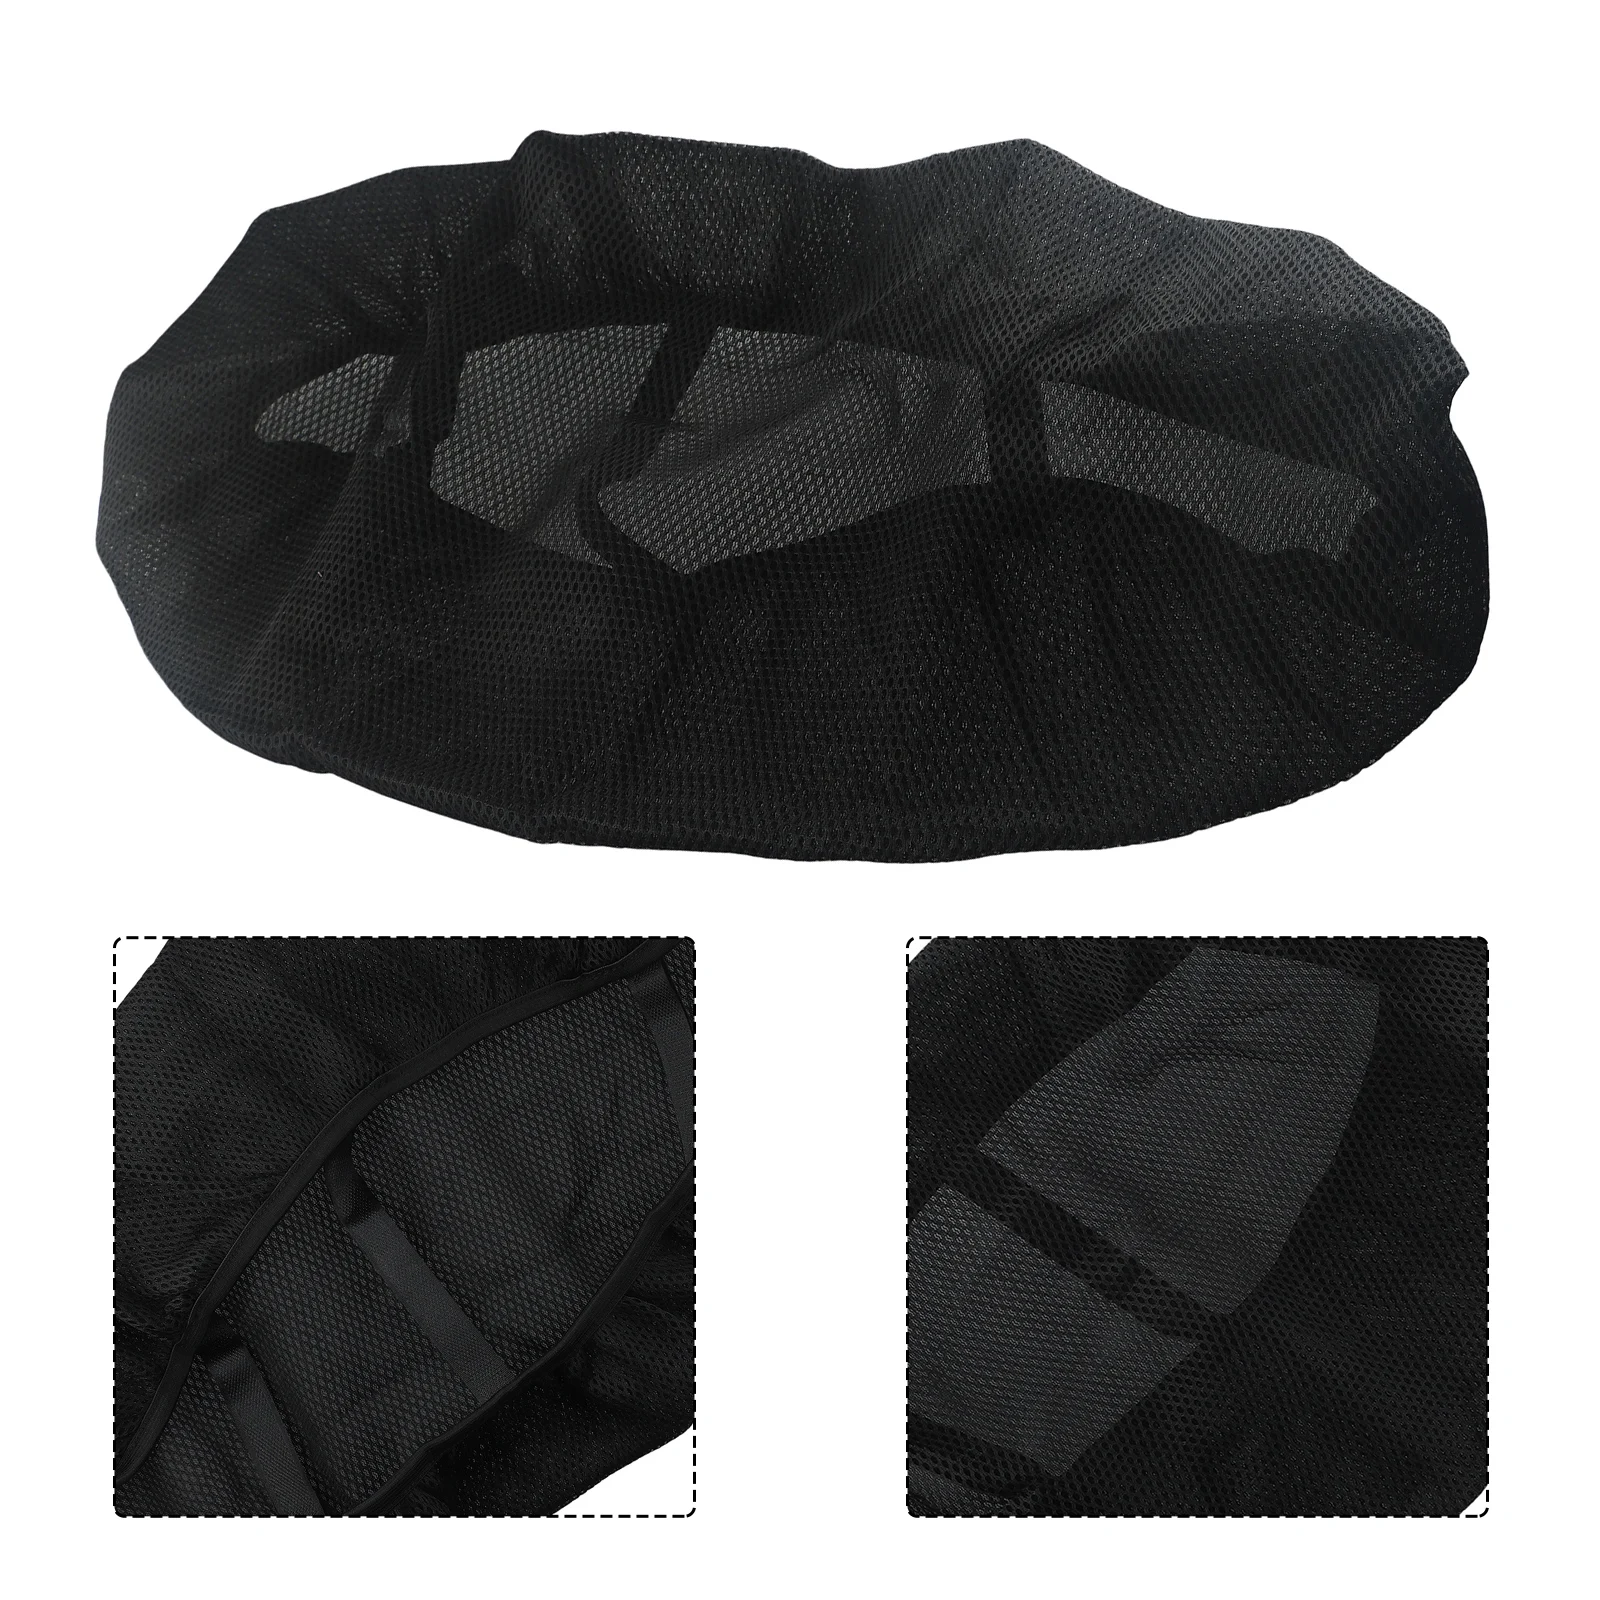 Motorcycle Cushion Seat Cover Motorcycle Mildew-proof Moisture-proof Motorcycle Pad Net 85*60CM Black Breathable motorcycle anti slip seat cushion mesh net motorcycle breathable for seat cover pad 85 60cm motorcycle cushion cover